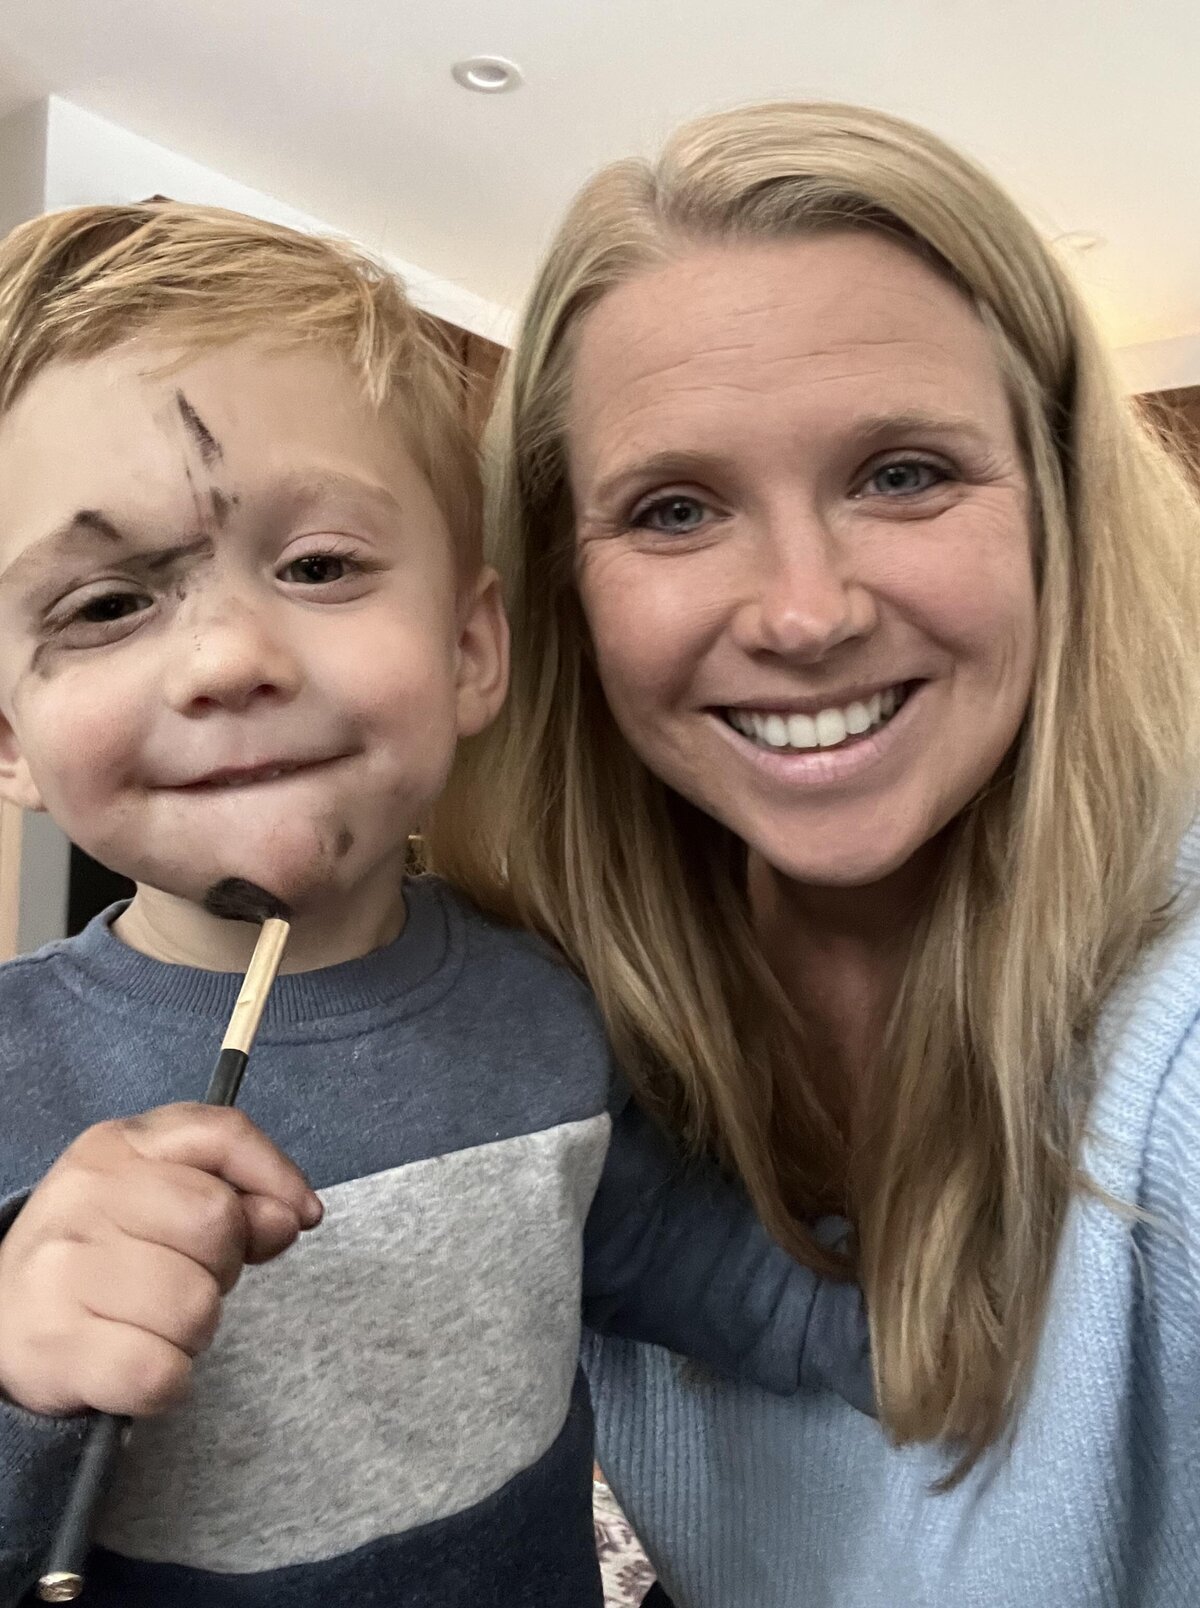 Toddler does his makeup with moms makeup brushes getting covered in brown eyeshadow